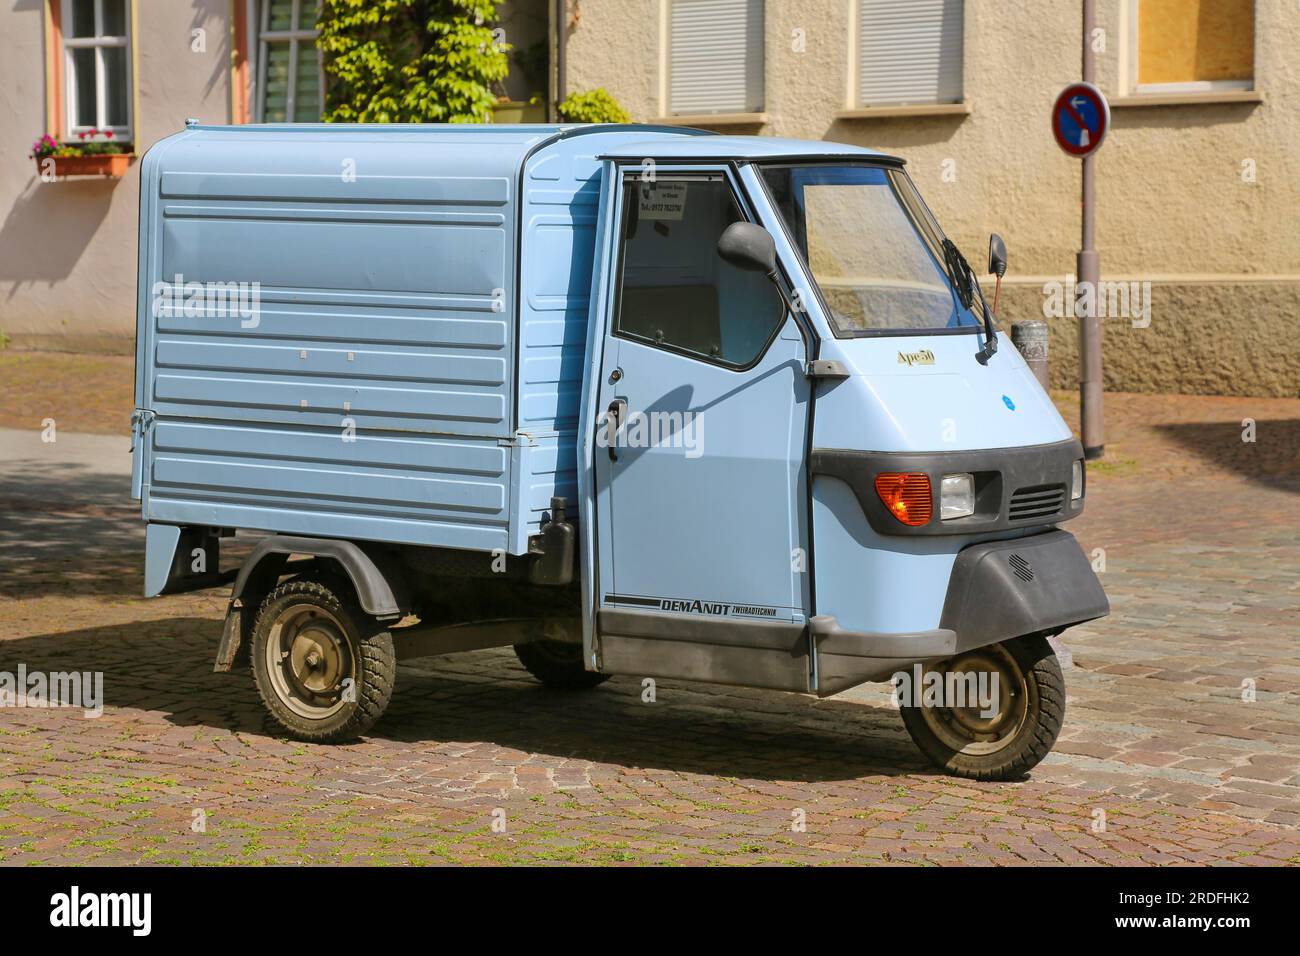 288 Piaggio Ape 50 Images, Stock Photos, 3D objects, & Vectors